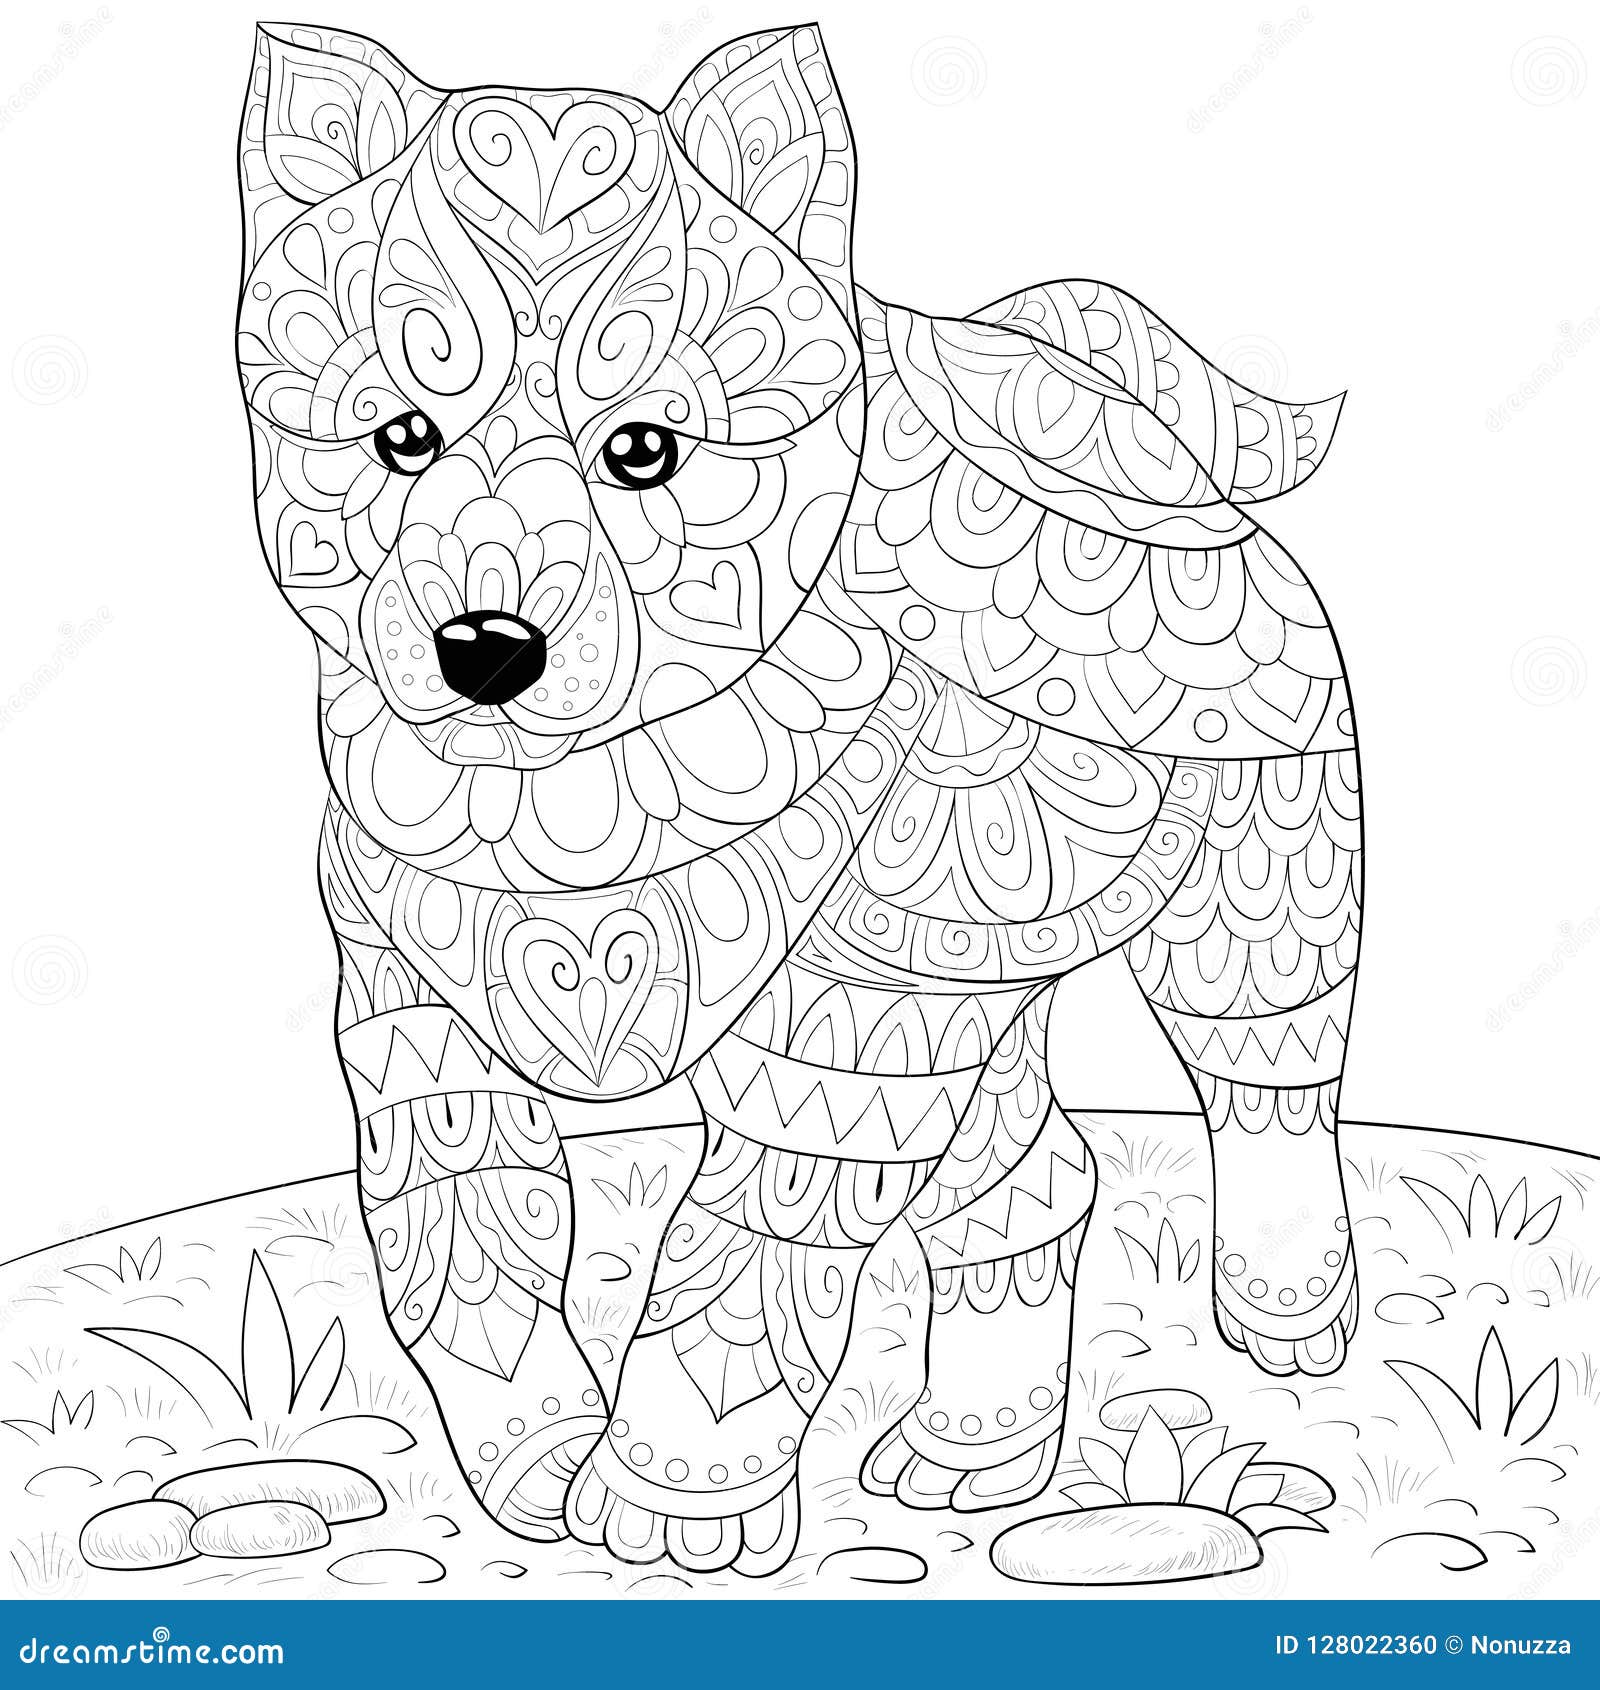 Adult Coloring Page,book a Cute Dog Image for Relaxing Activity ...